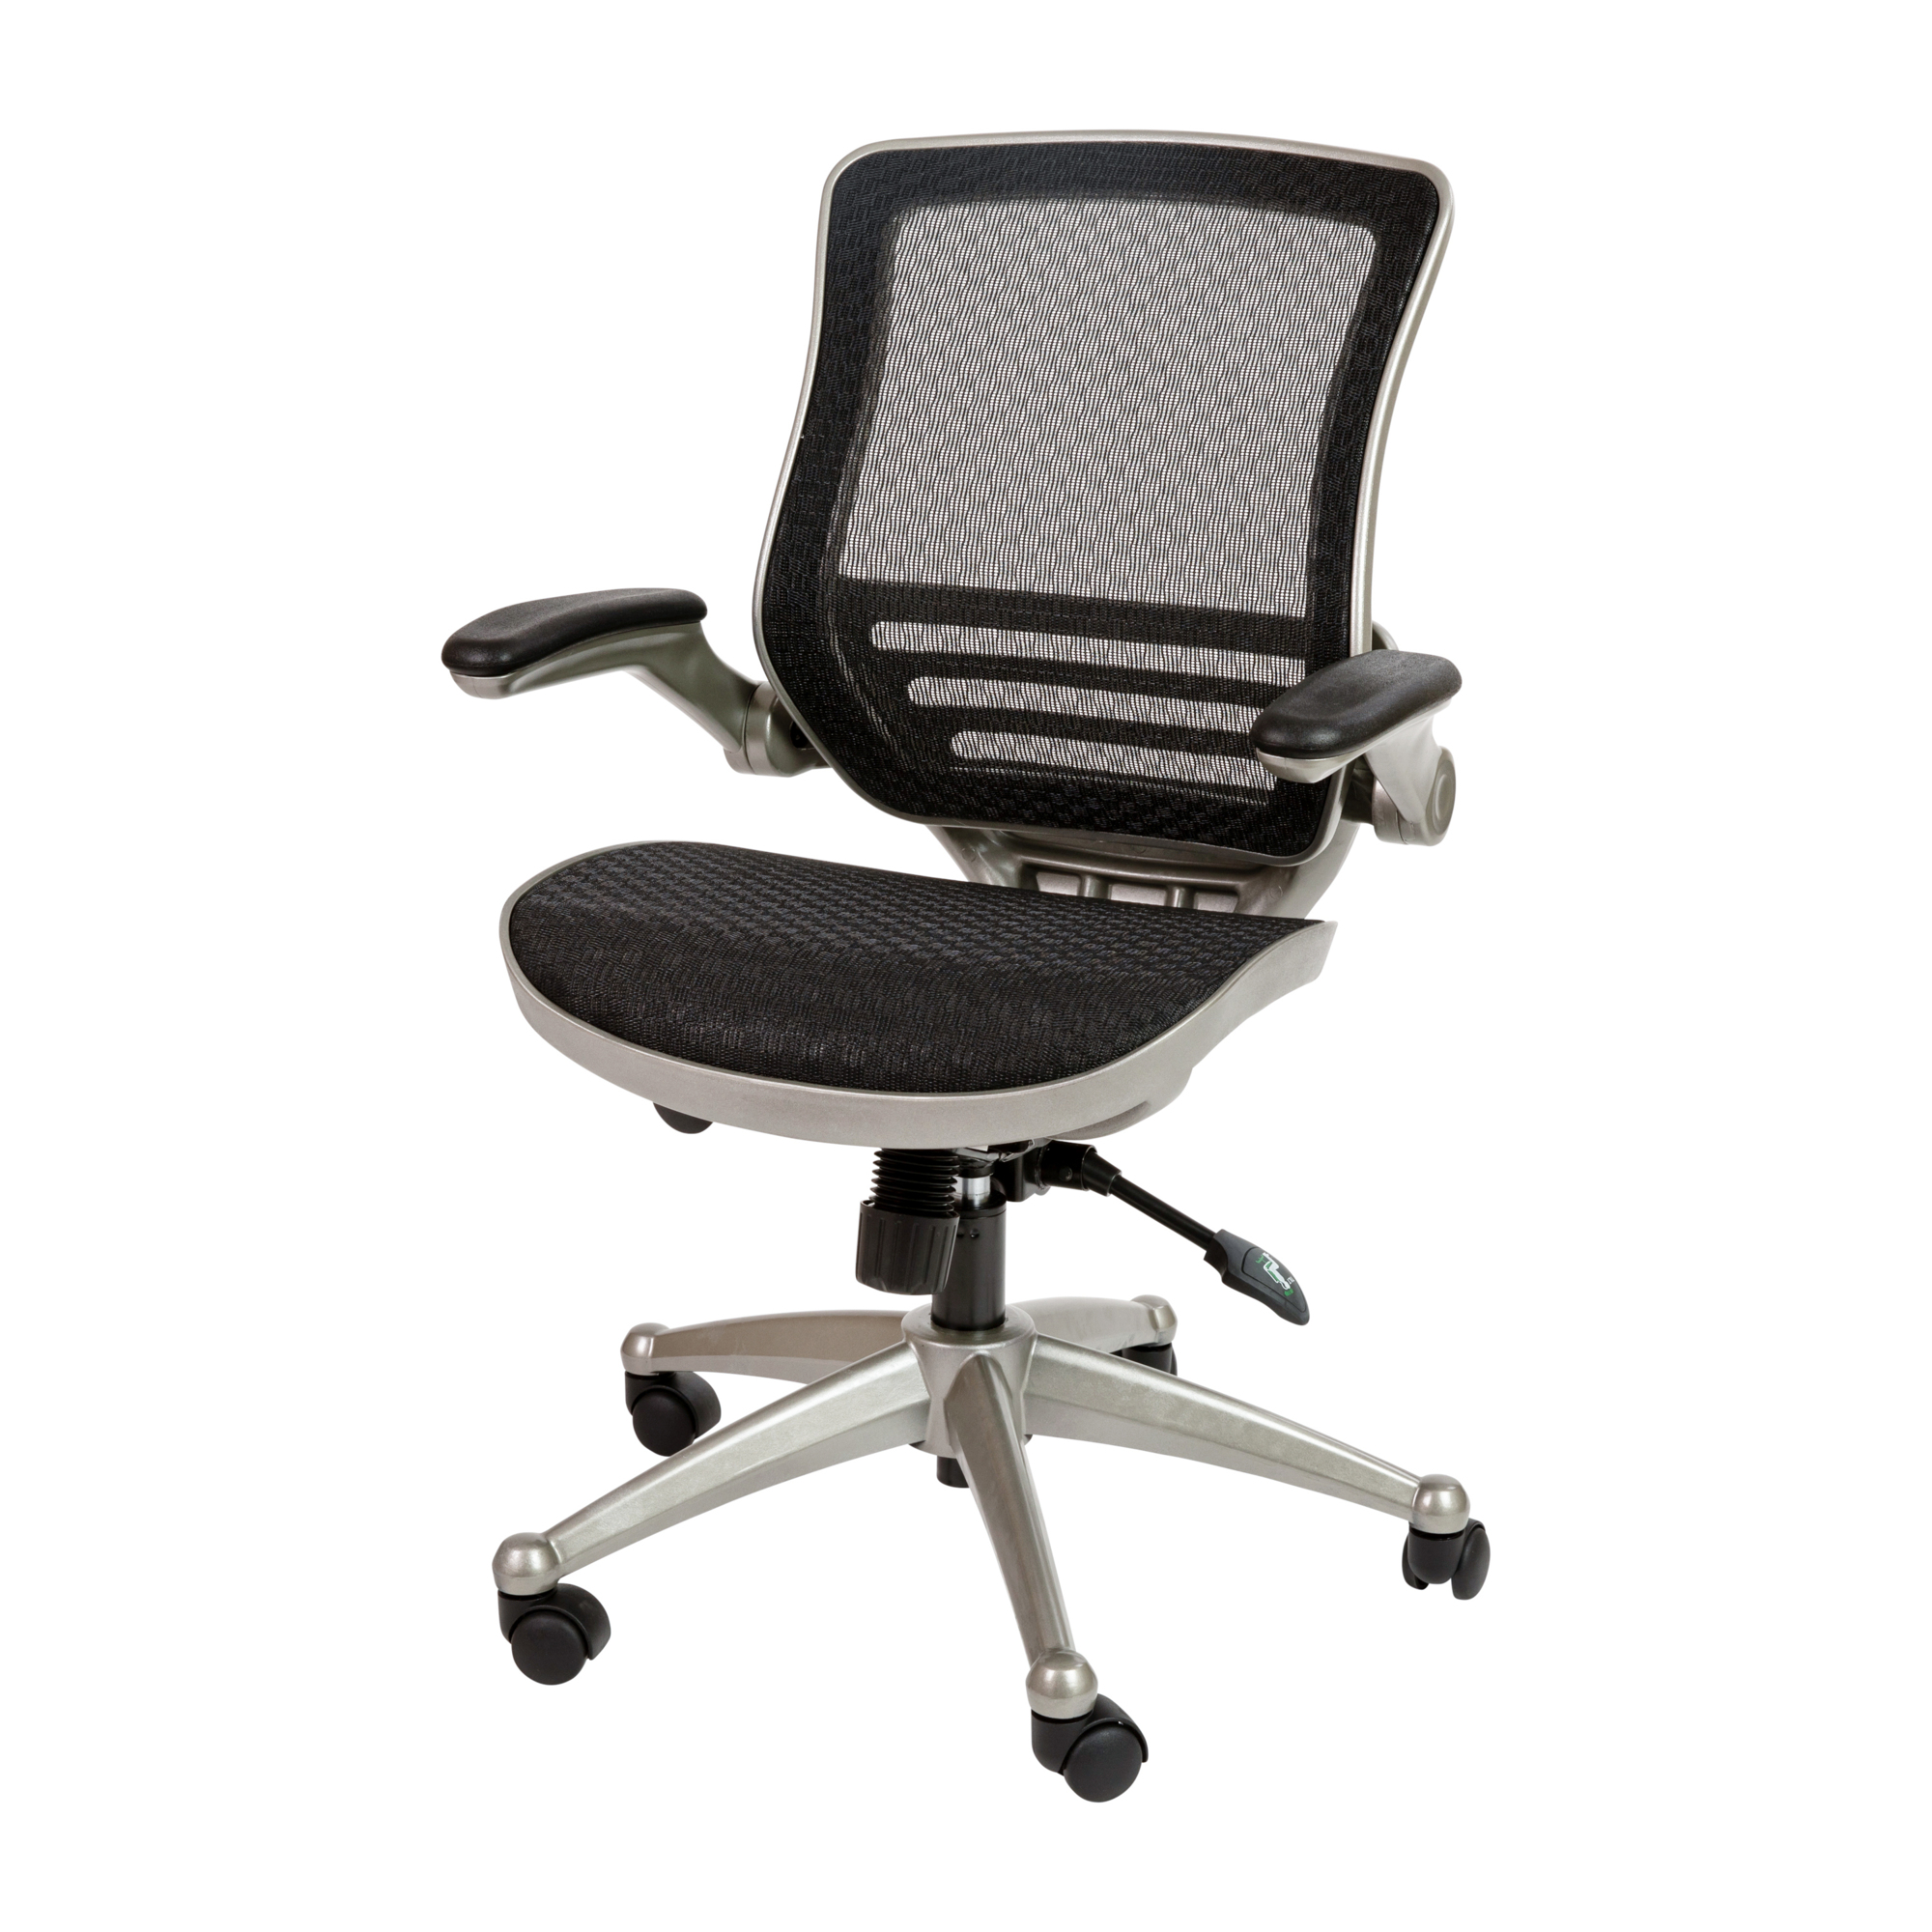 Flash Furniture, Black Mid-Back Mesh Office Chair with Flip-Up Arms, Primary Color Black, Included (qty.) 1, Model BL8801XBKGR